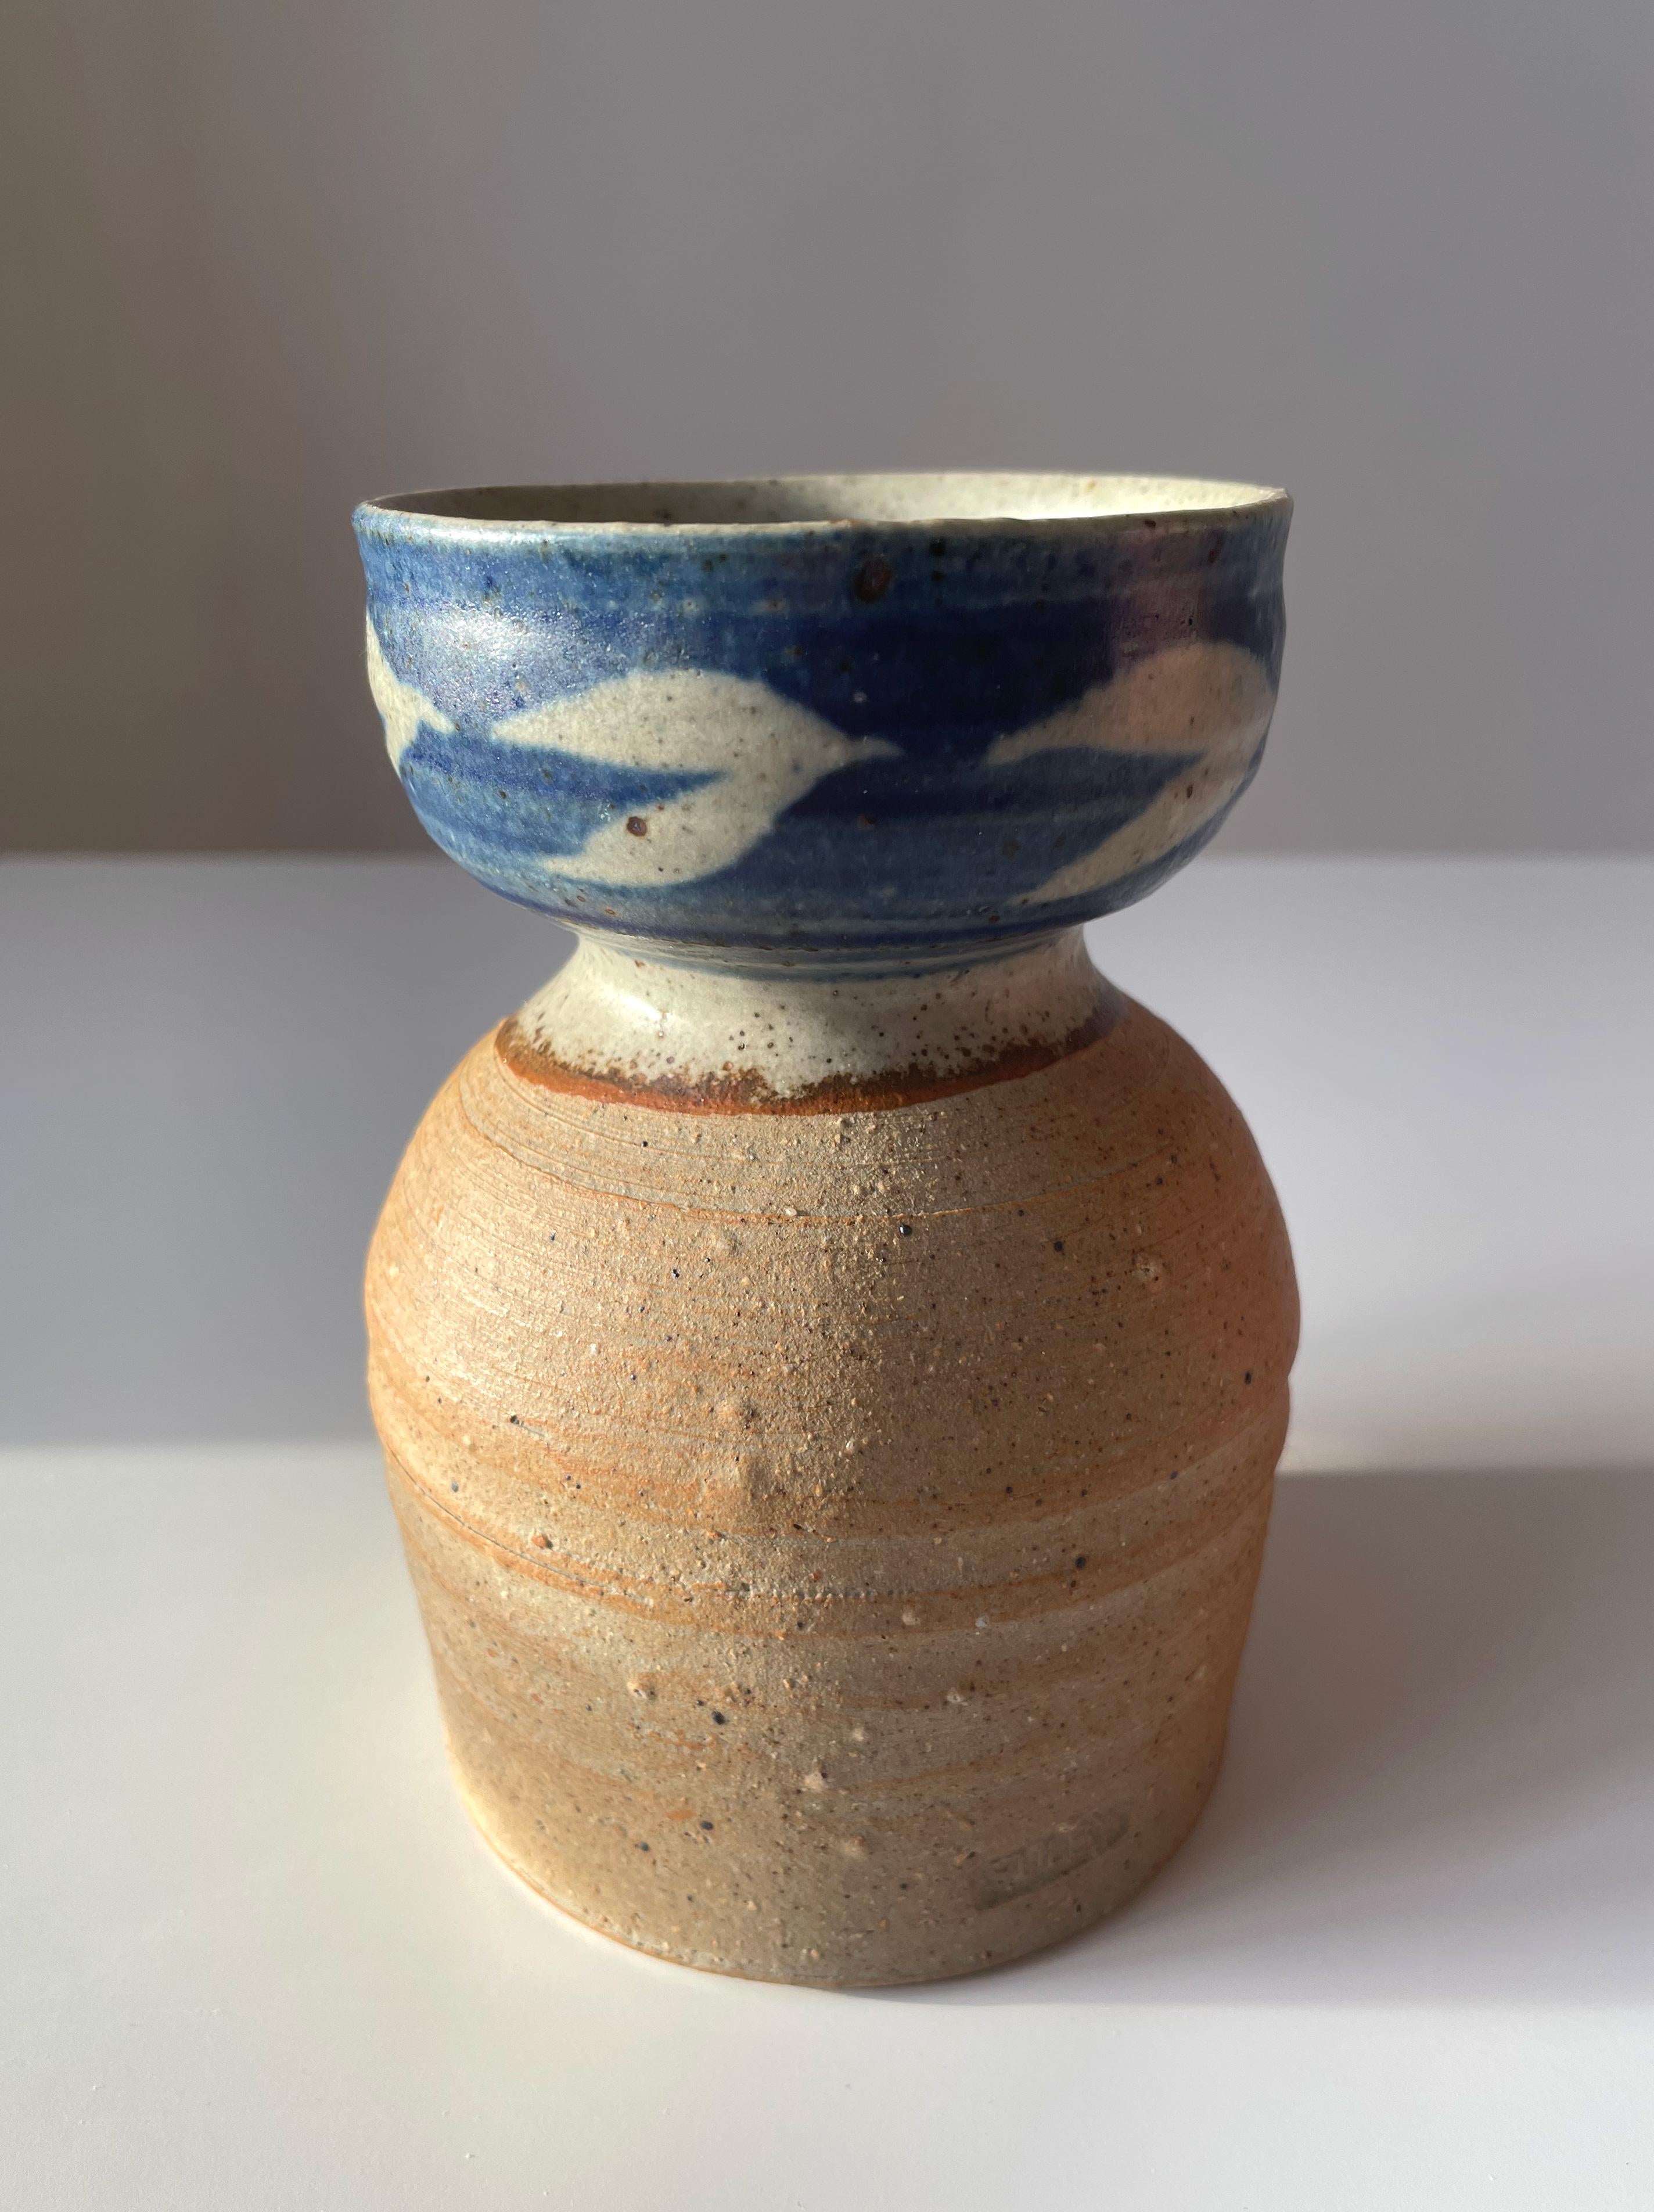 Handmade Danish modern ceramic bottle vase with blue and sand colored organic decor over rustic raw base. Pattern resembing leaves or birds in flight. Sand colored glaze on the inside. Stamped on side. Beautiful vintage condition.